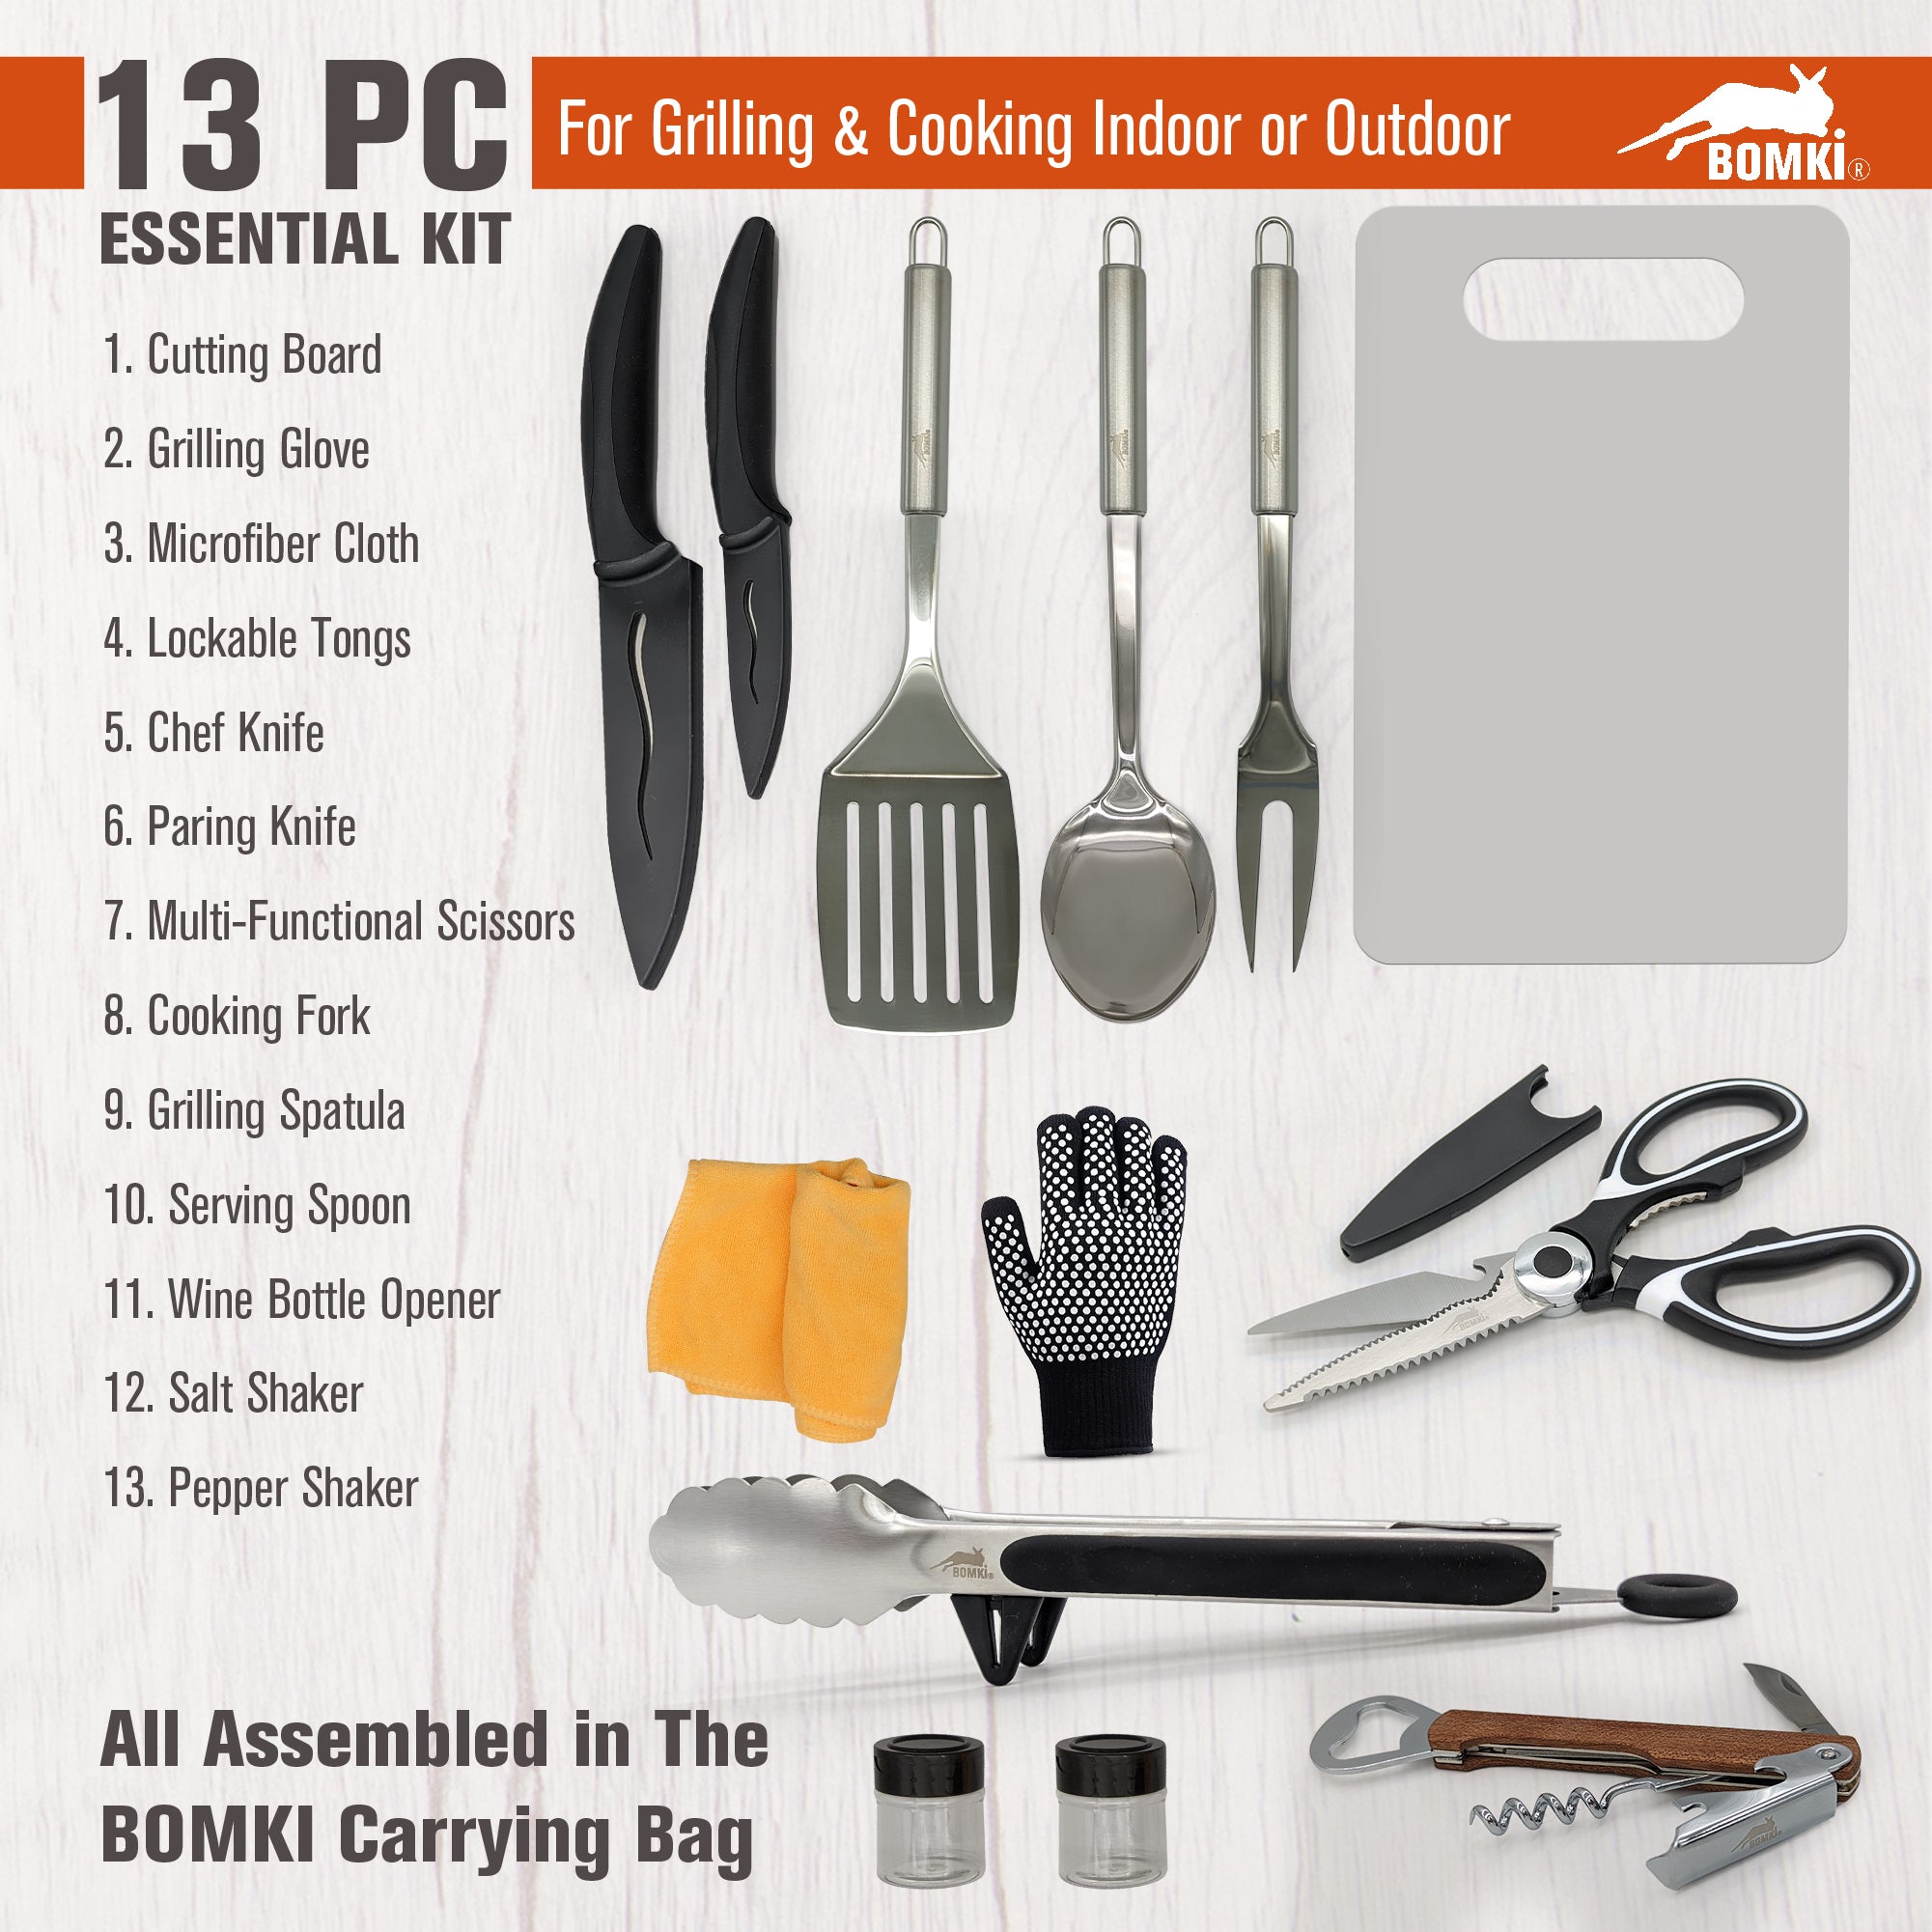 BOMKI 13 PC Grilling & Cooking Essentials - Green